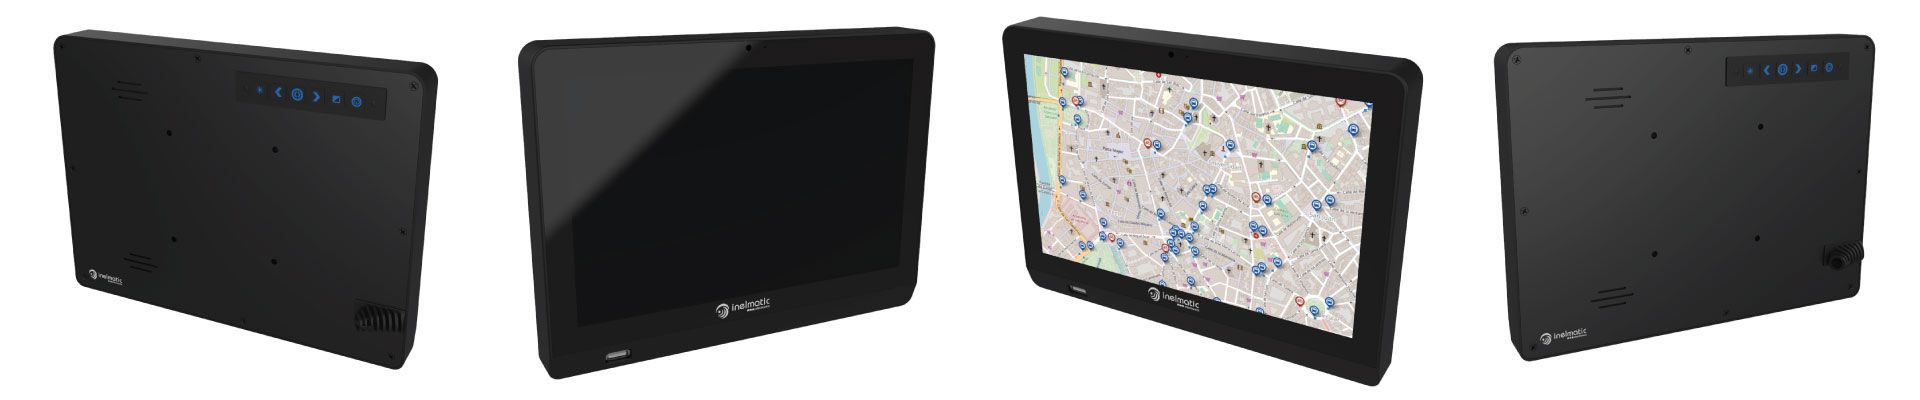 Industrial grade and automotive rugged monitors - Inelmatic